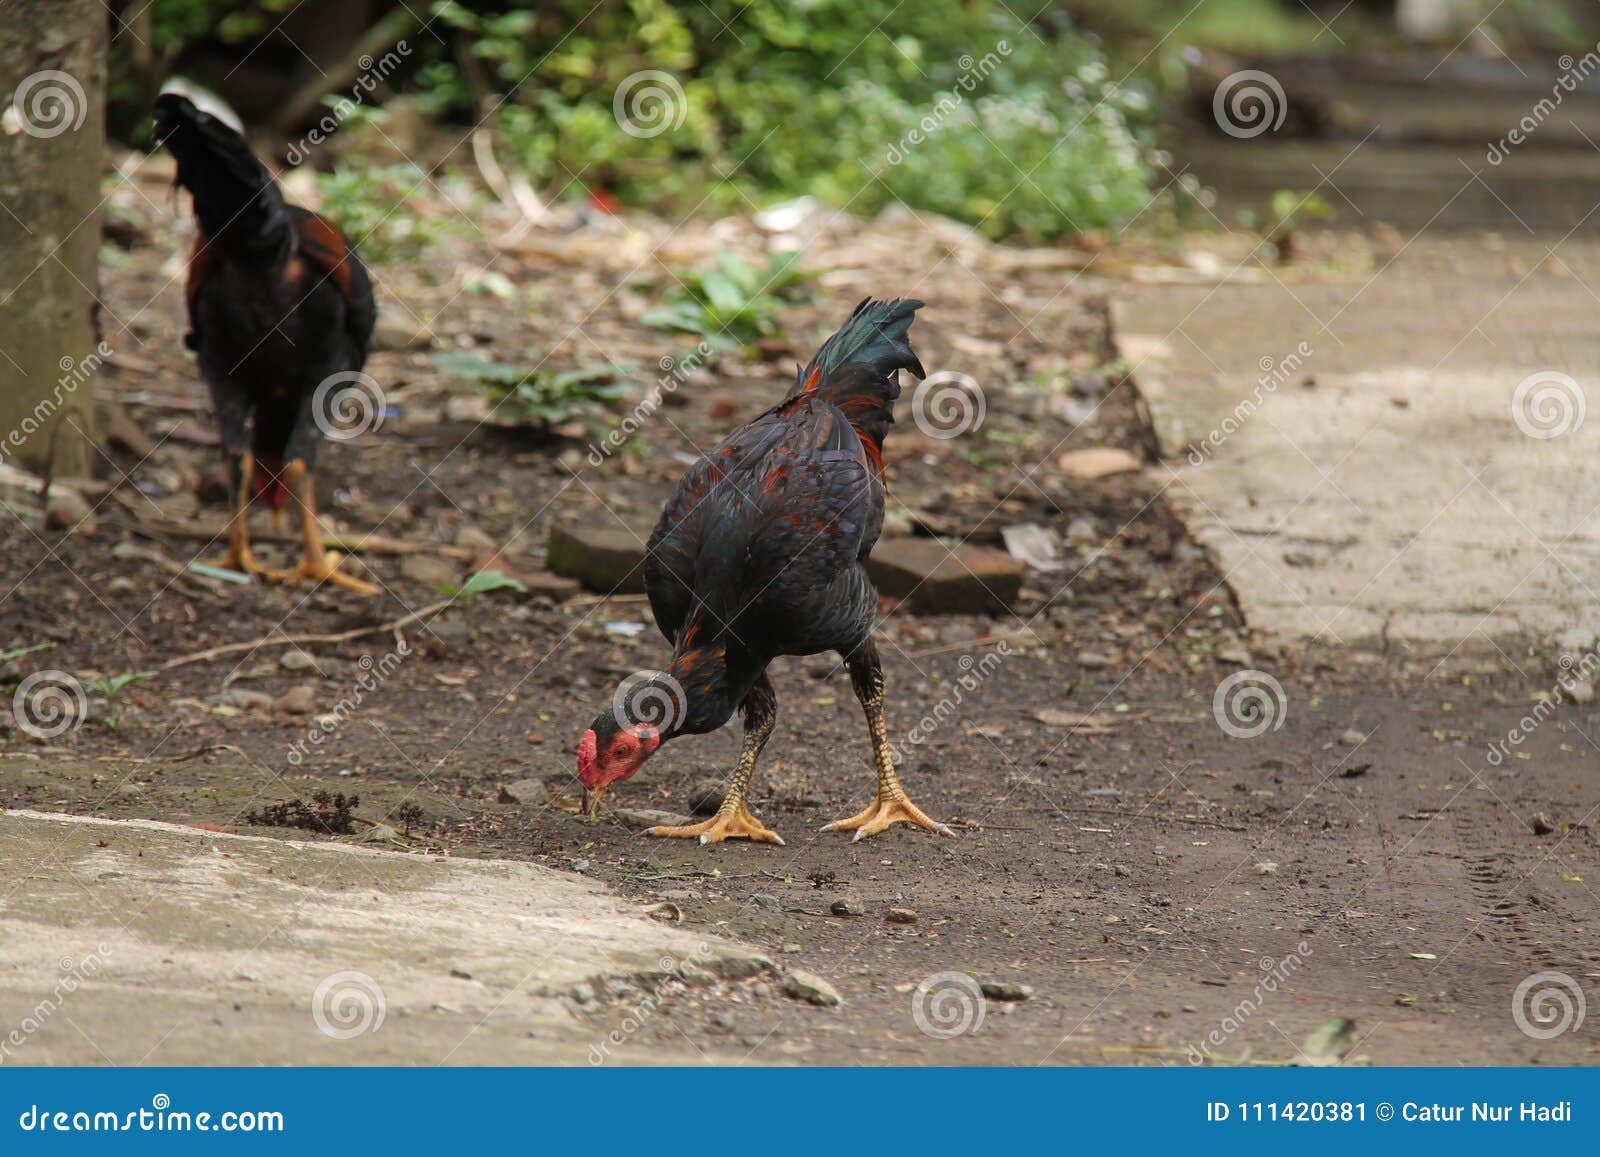 Chicken in the Yard Version 4 Stock Image - Image of animal, farmyard